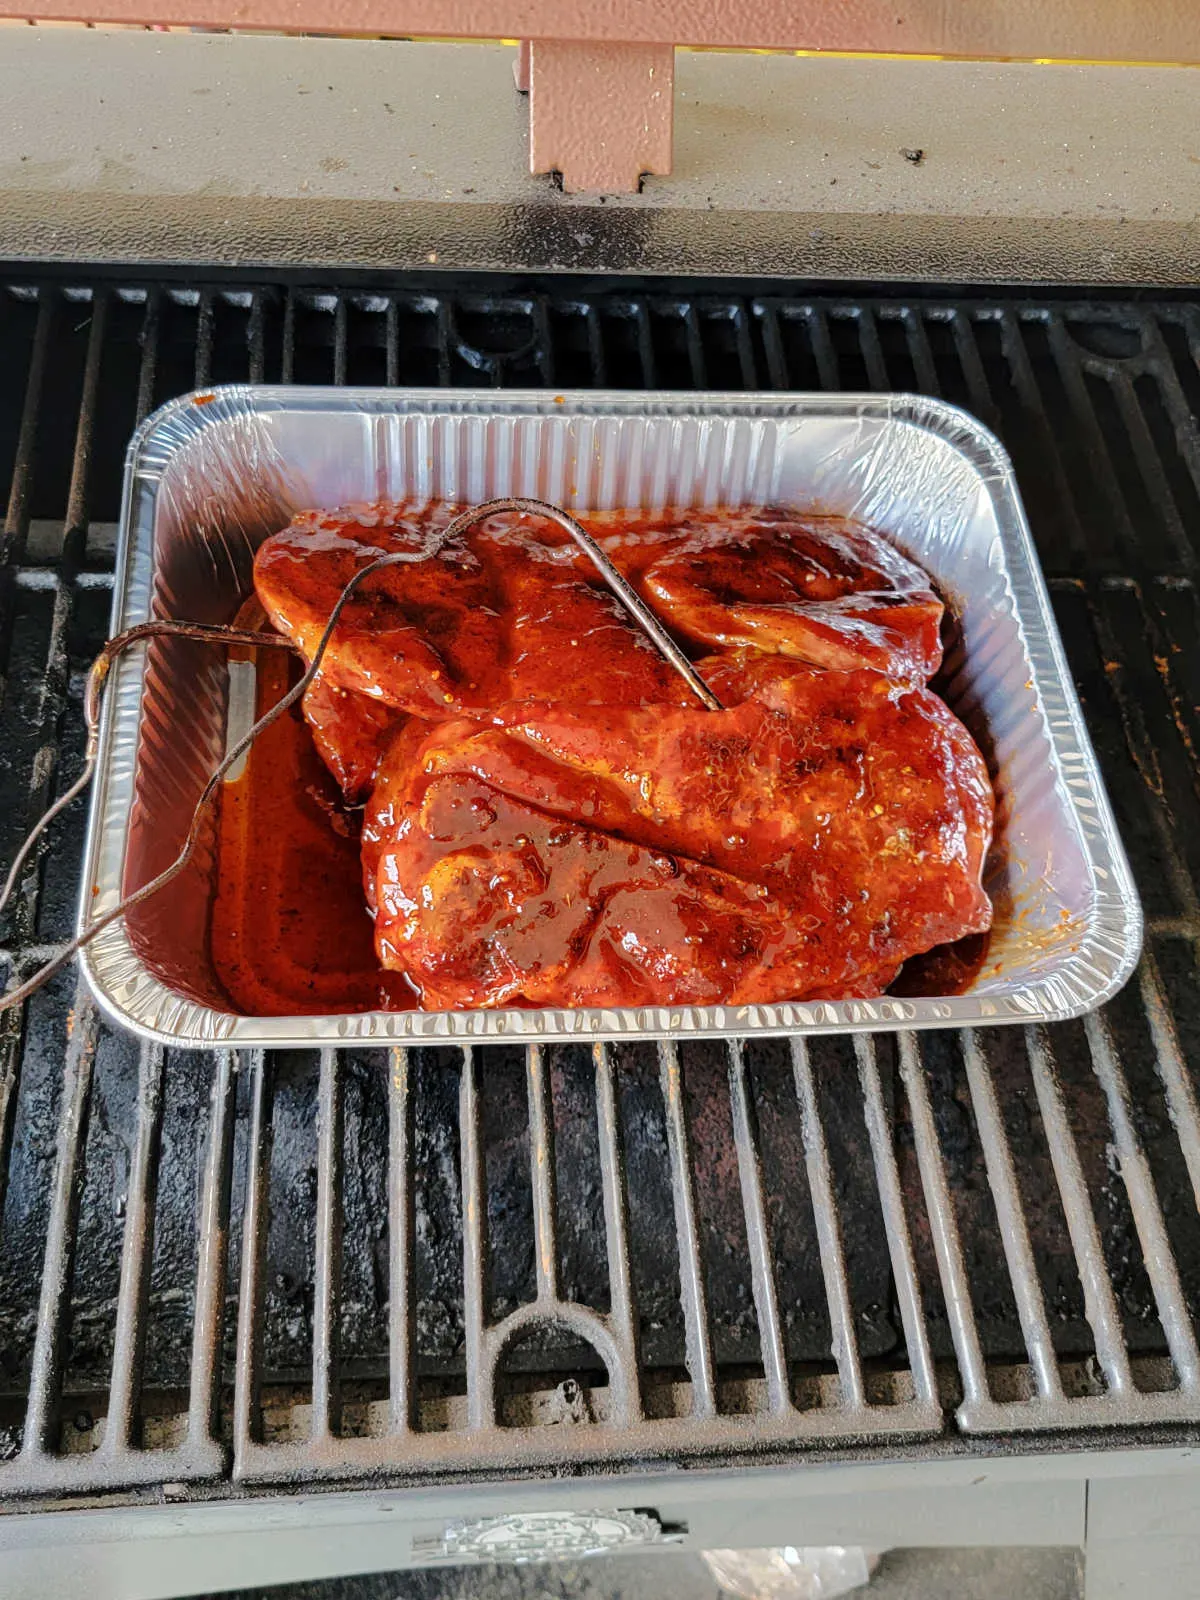 Second step of cooking, the smoked pork steaks are in an aluminum pan with bbq sauce, ready to cook more.